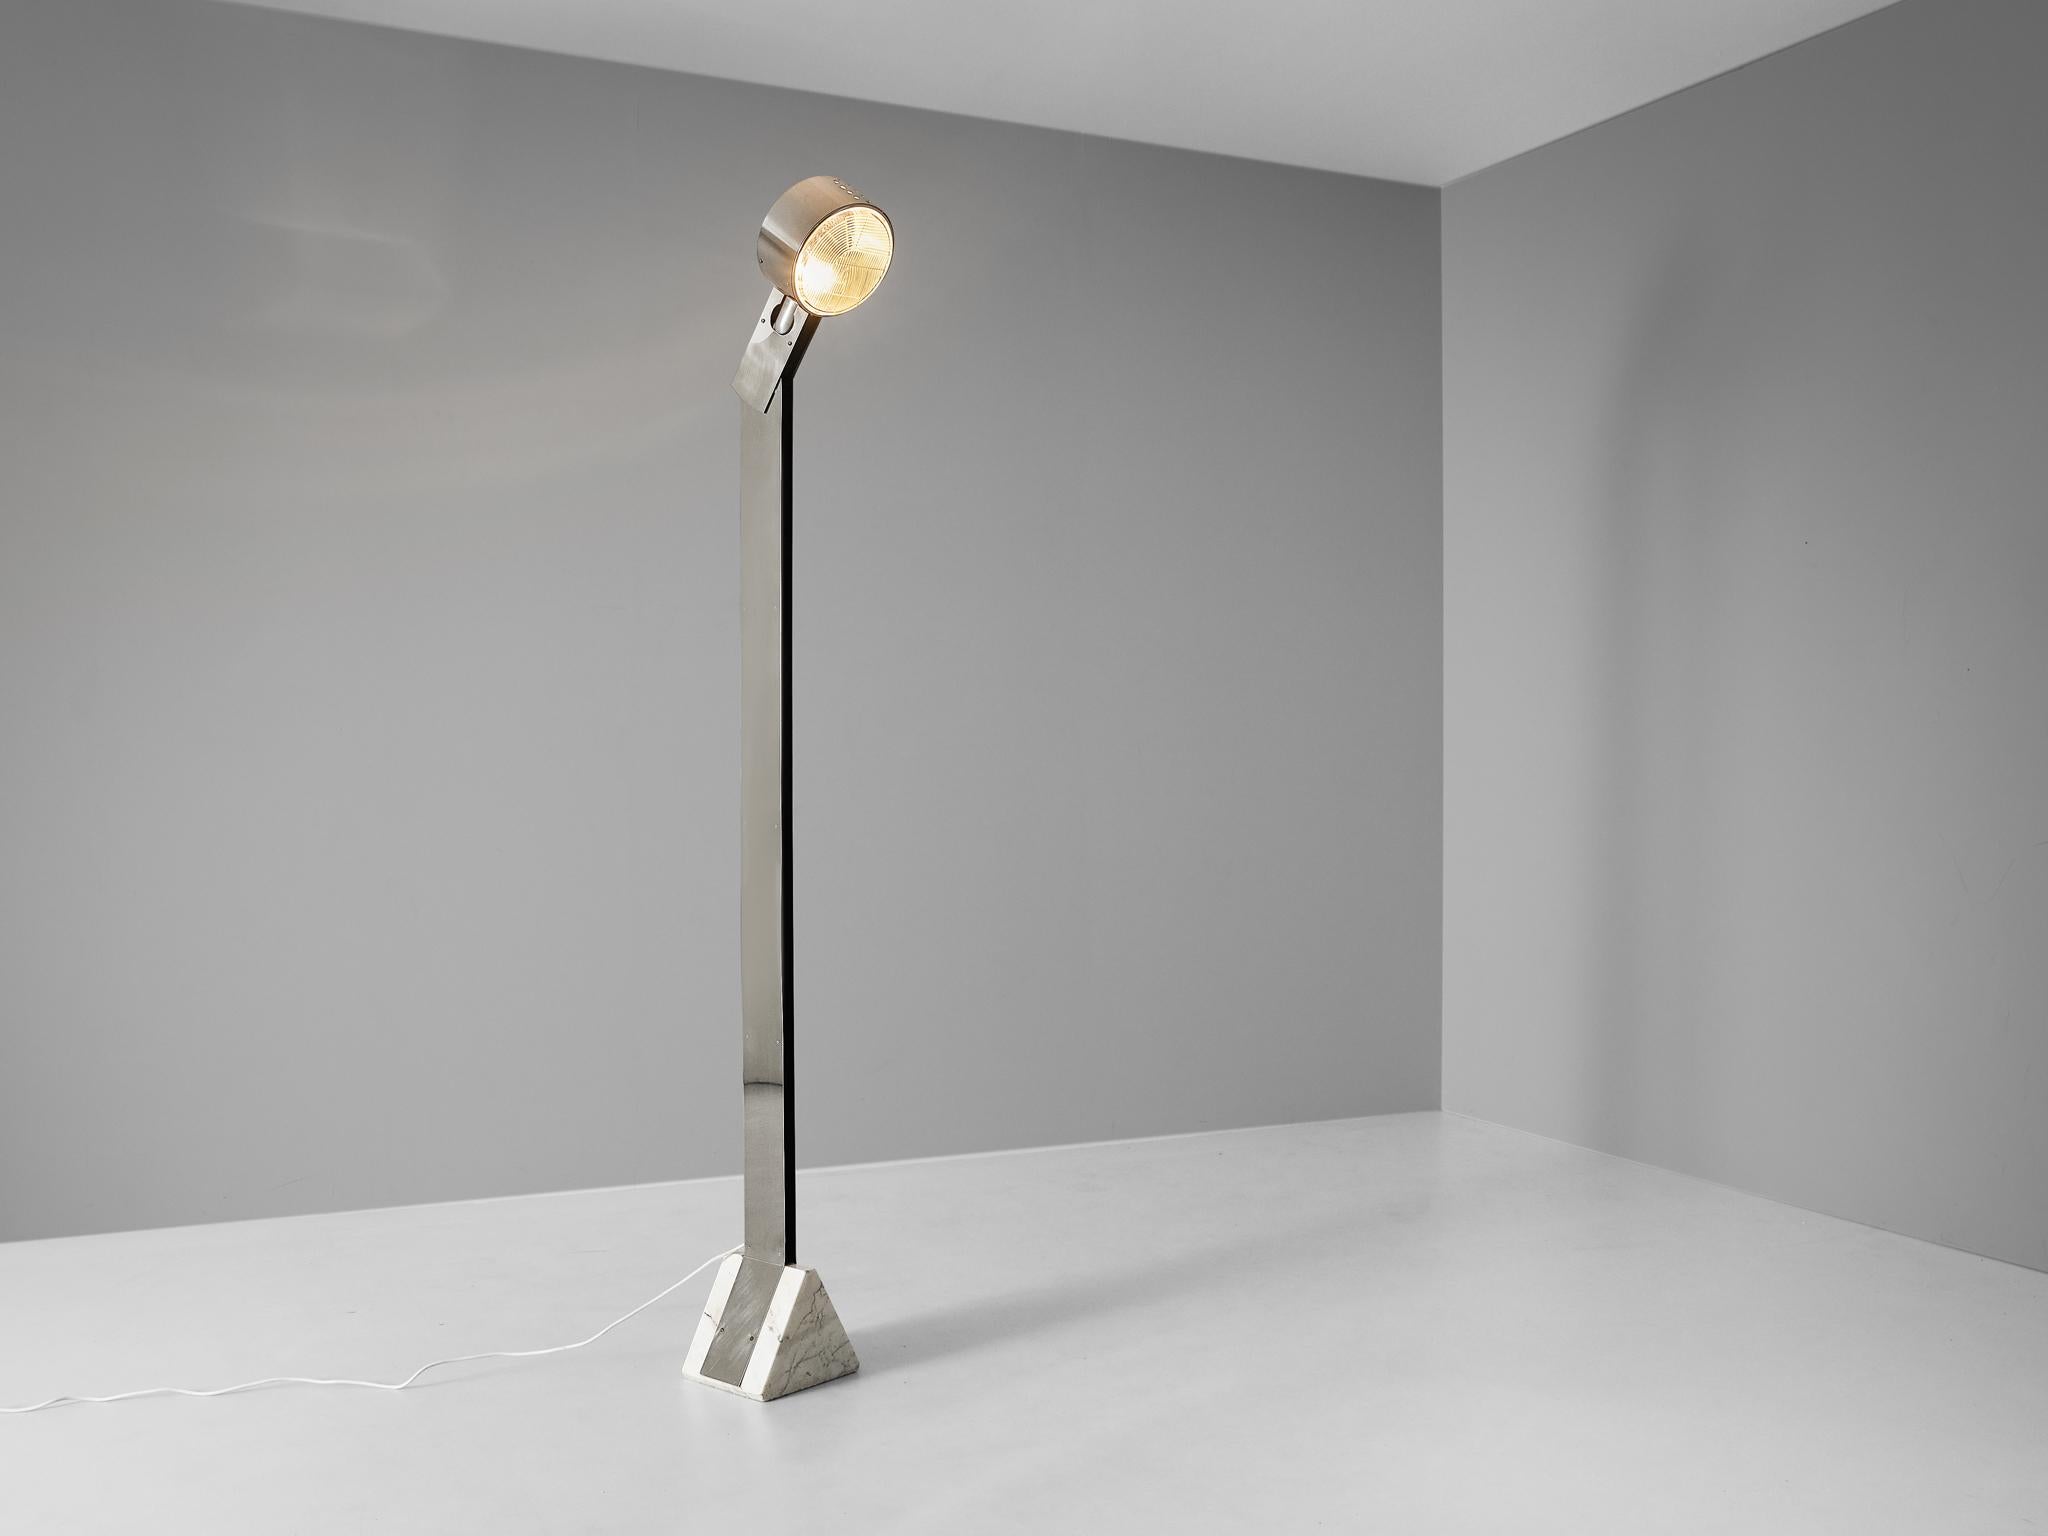 G. Fantinato for Febo Luce, 'Faro' floor Lamp, stainless steel, Carrara marble, glass, Italy, 1970s

The artistic object in question is an exquisite floor lamp designed by Italian designer, G. Fantinato, named 'Faro', the Italian term for